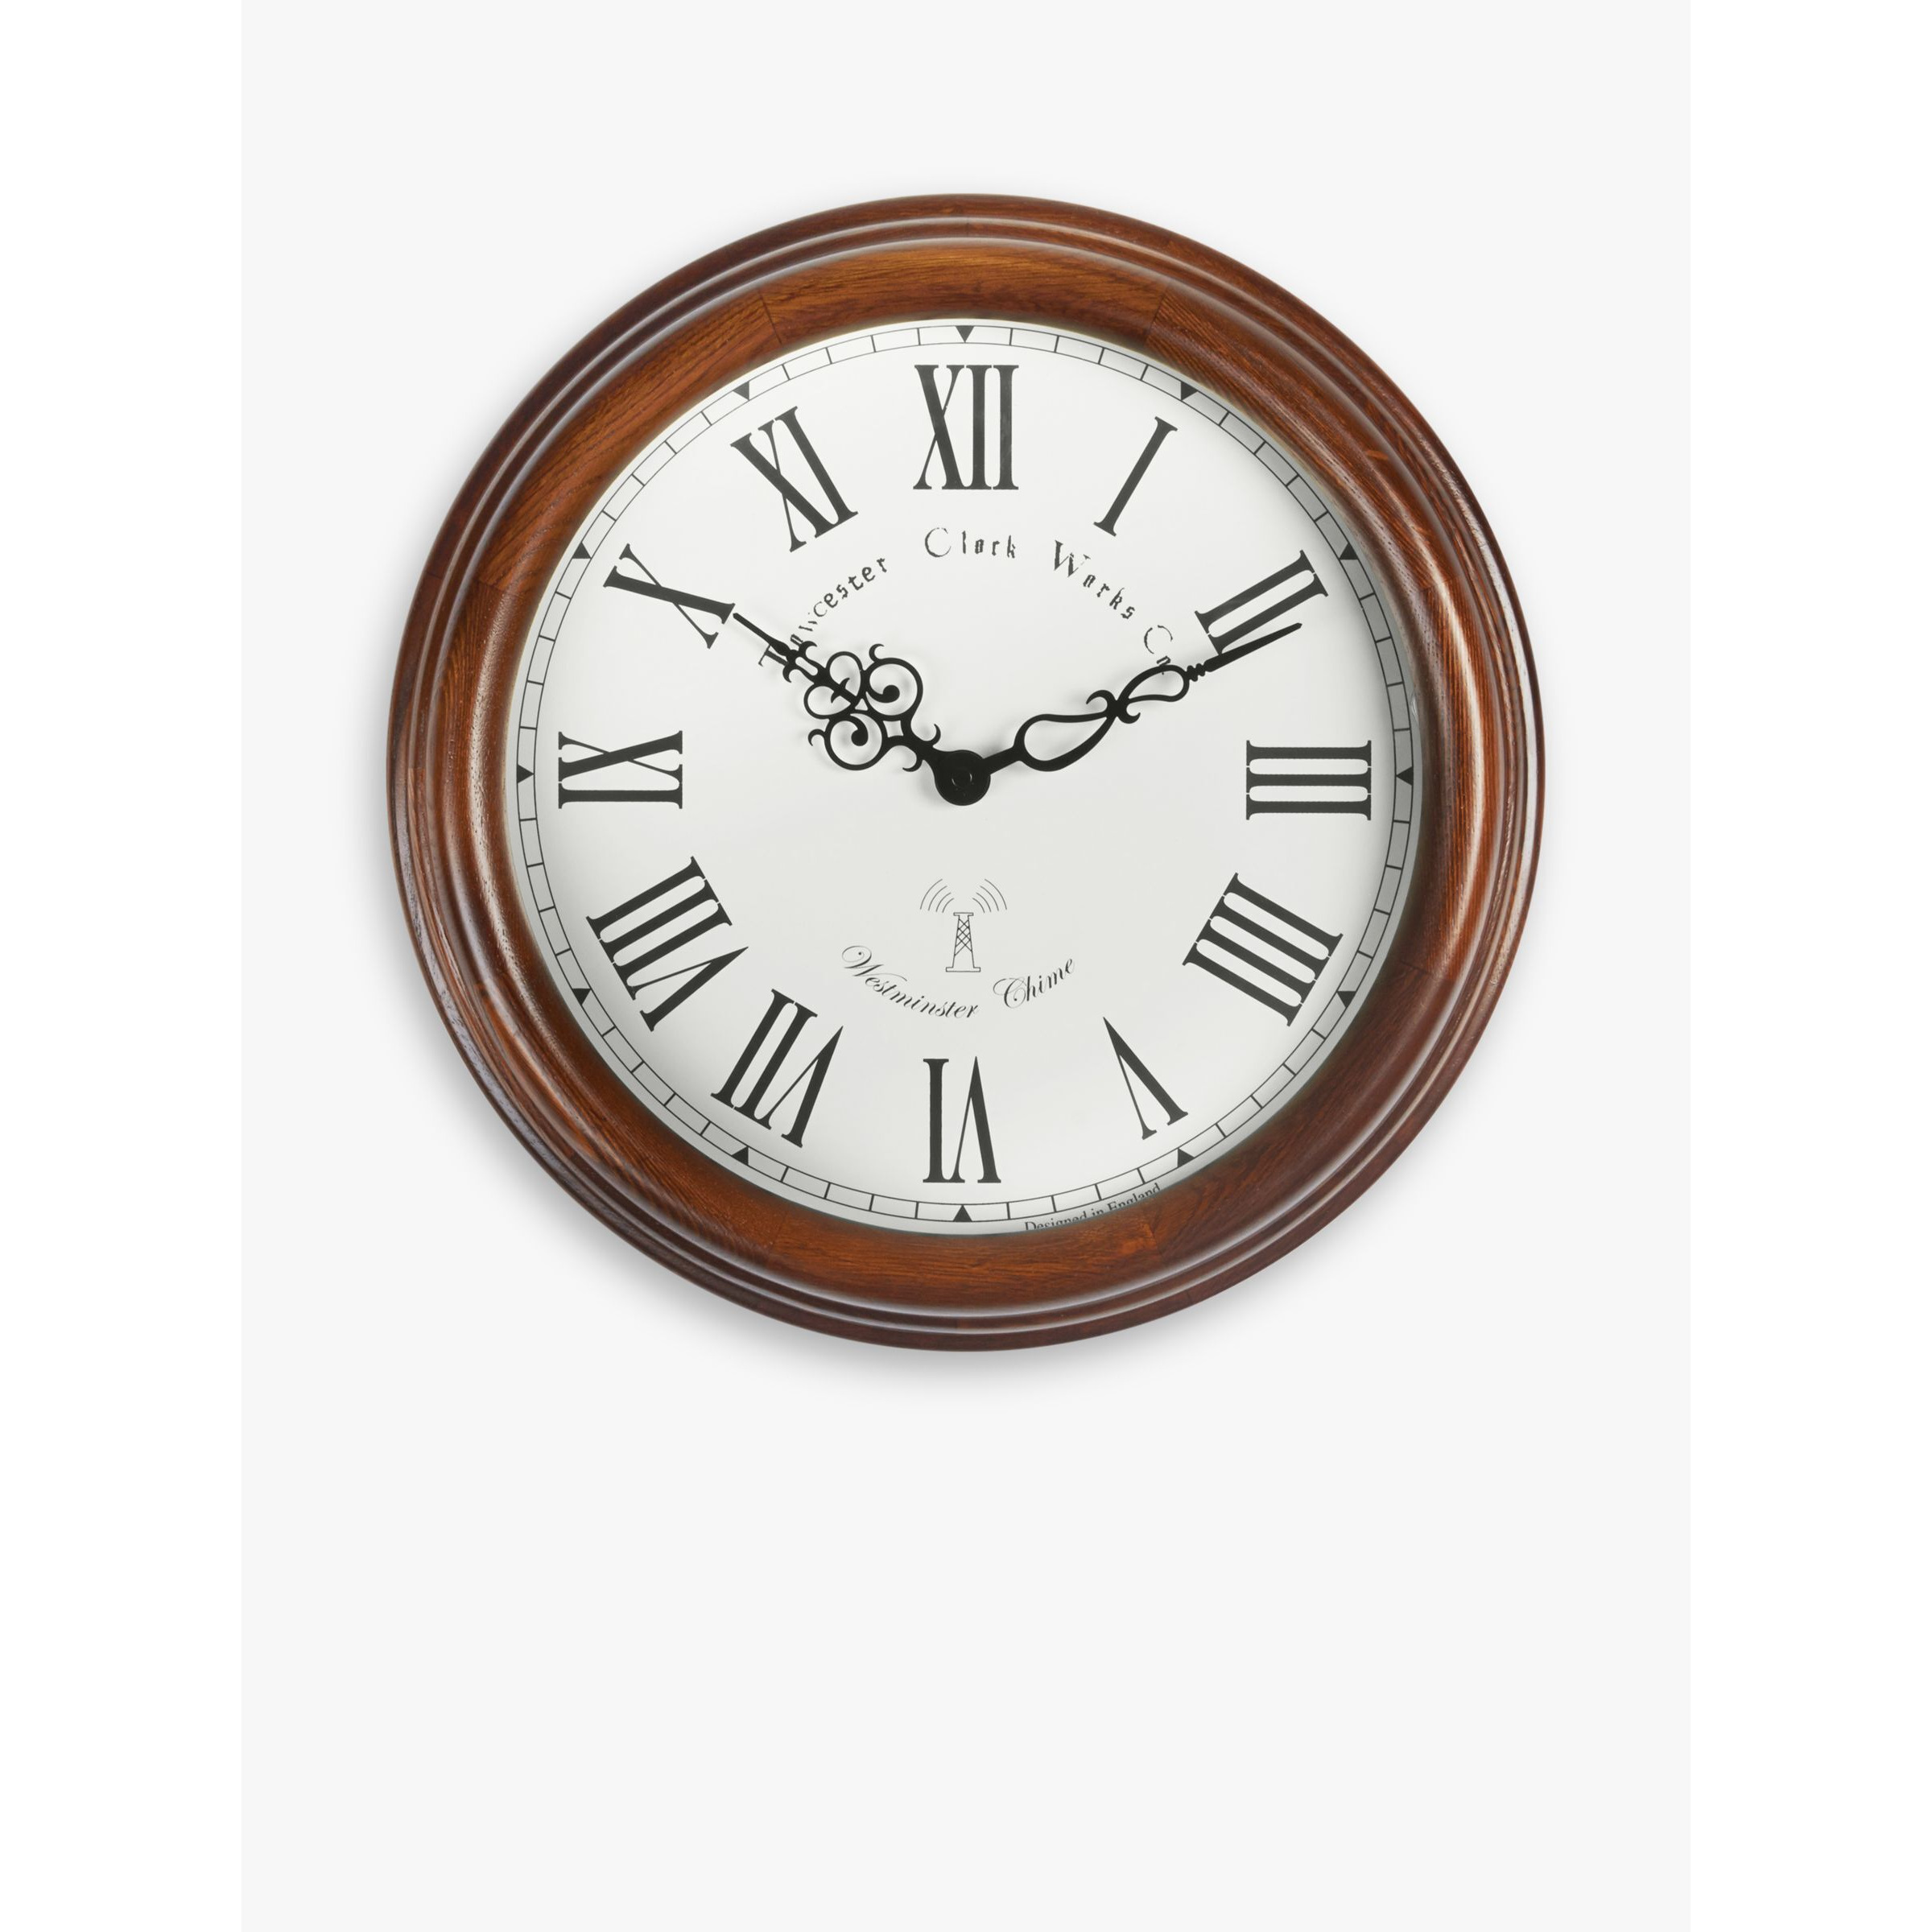 Acctim Towcester Lacock Radio Controlled Roman Numeral Analogue Wood Wall Clock, 39cm, Natural - image 1